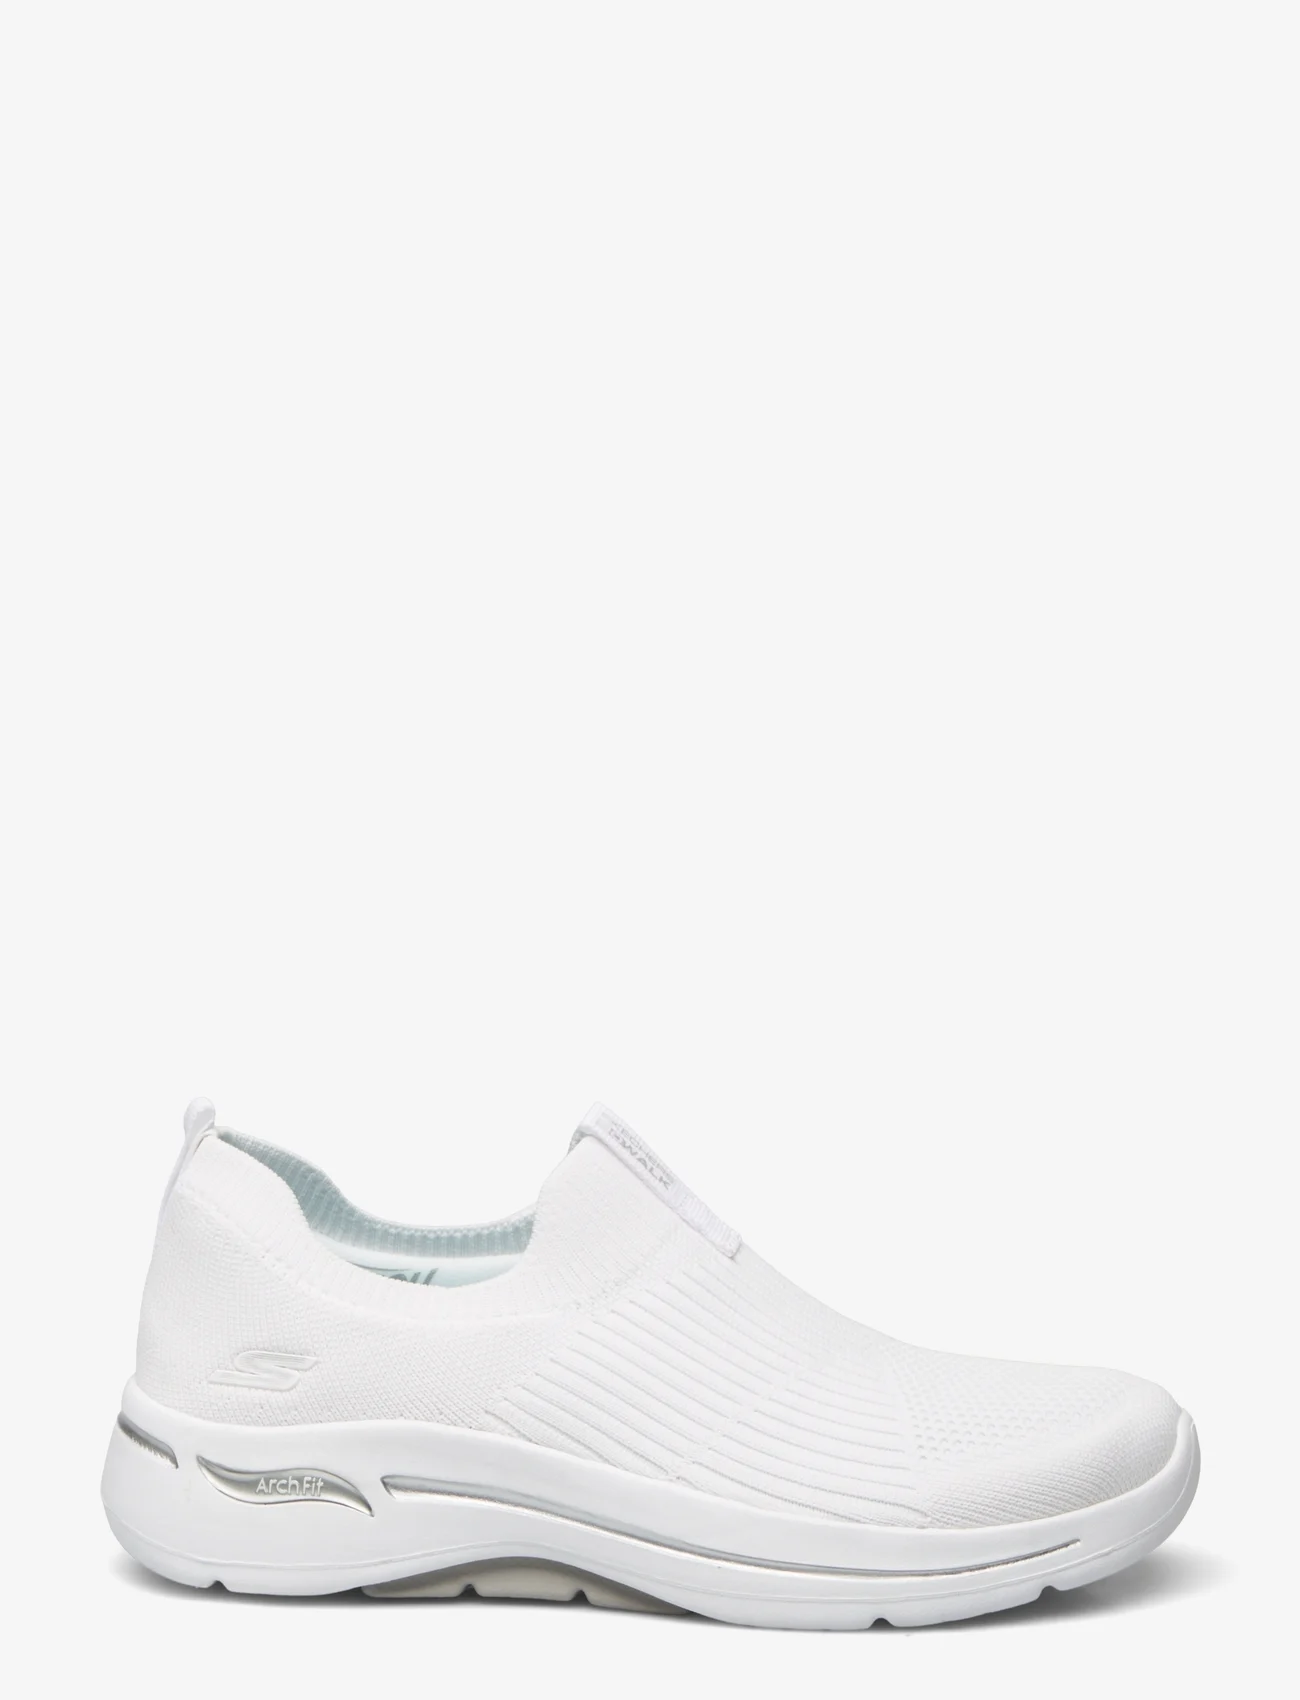 Skechers - Womens Go Walk  Arch Fit  - Iconic - slip-on sneakers - wht white - 1